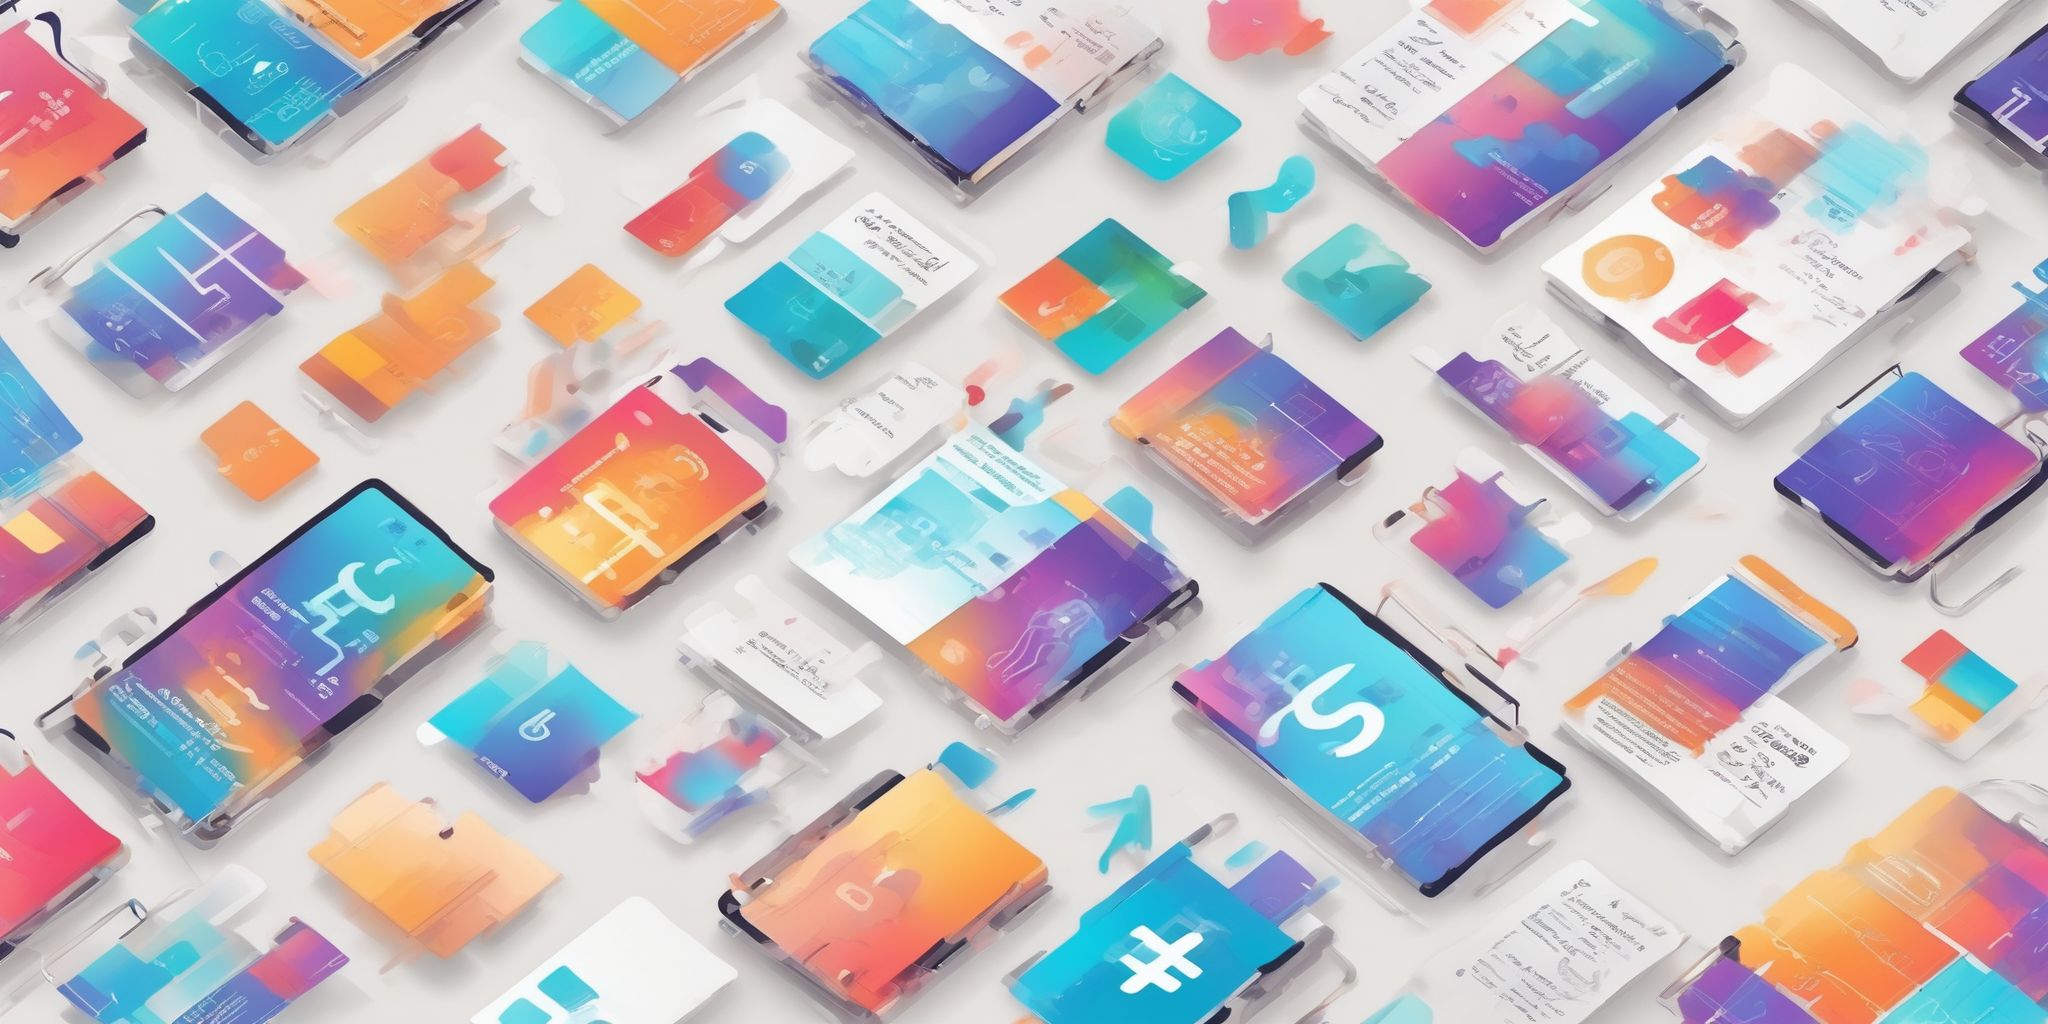 Hashtag handbook in illustration style with gradients and white background